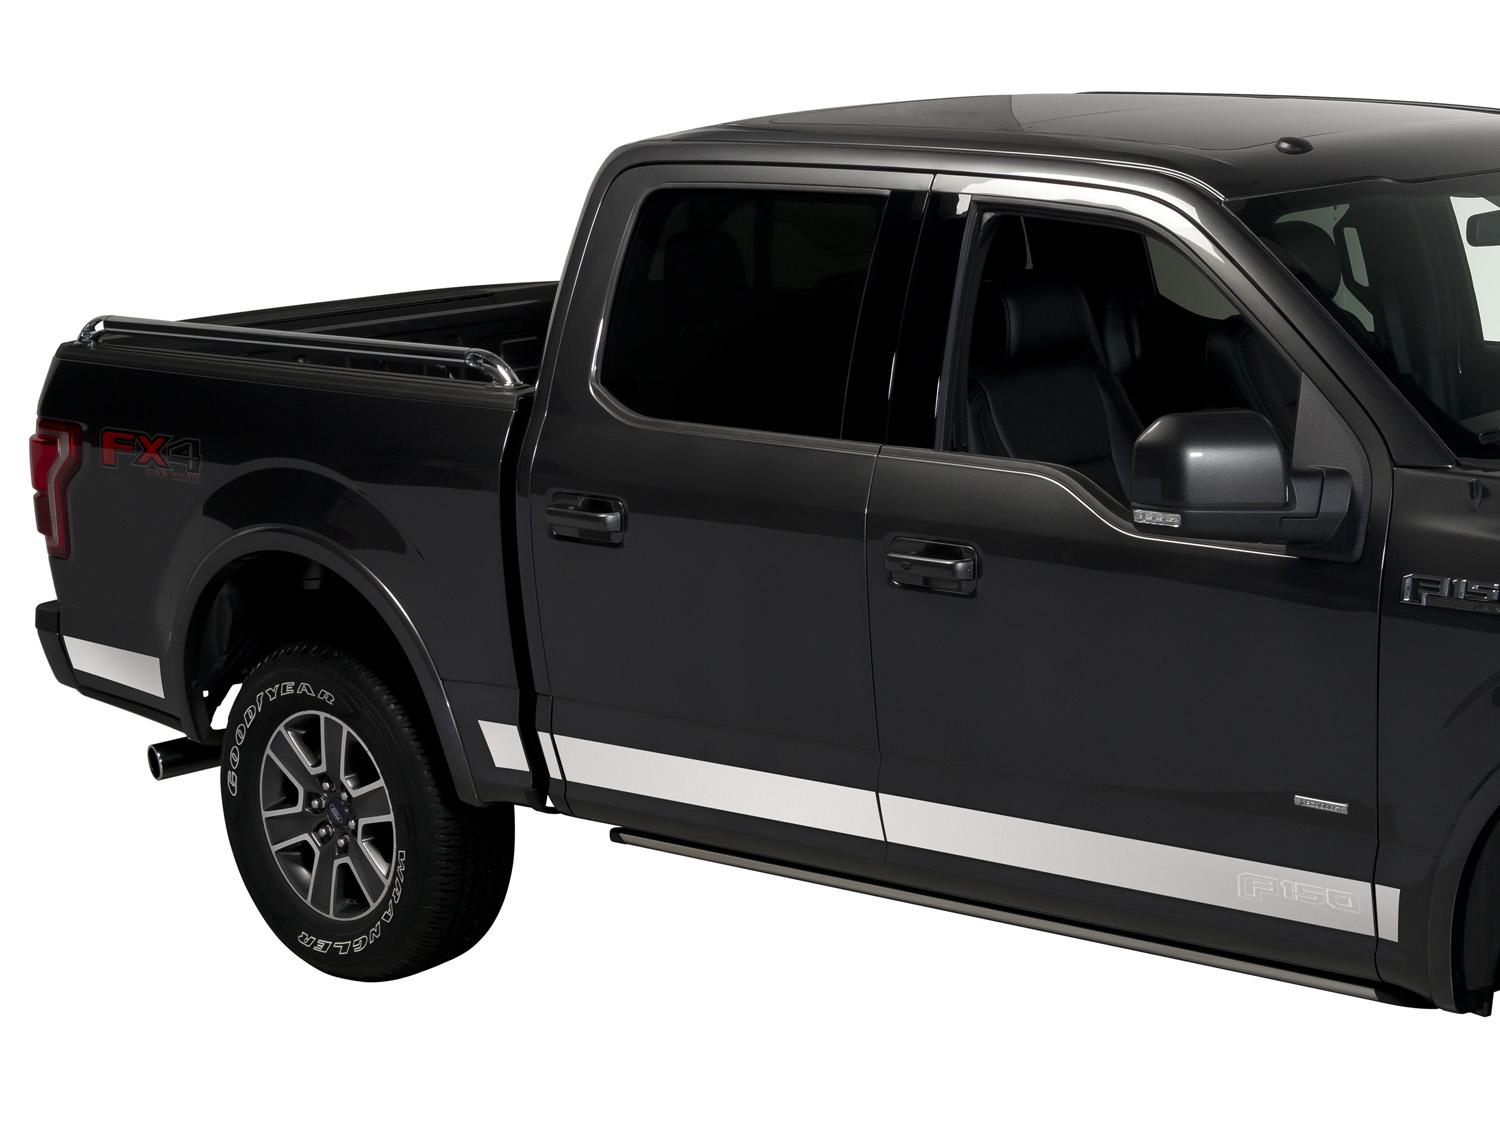 Image for Exterior Trim Kit - Body Side Molding, Black Platinum, Super Crew 6,5 Bed from AccessoriesCanada